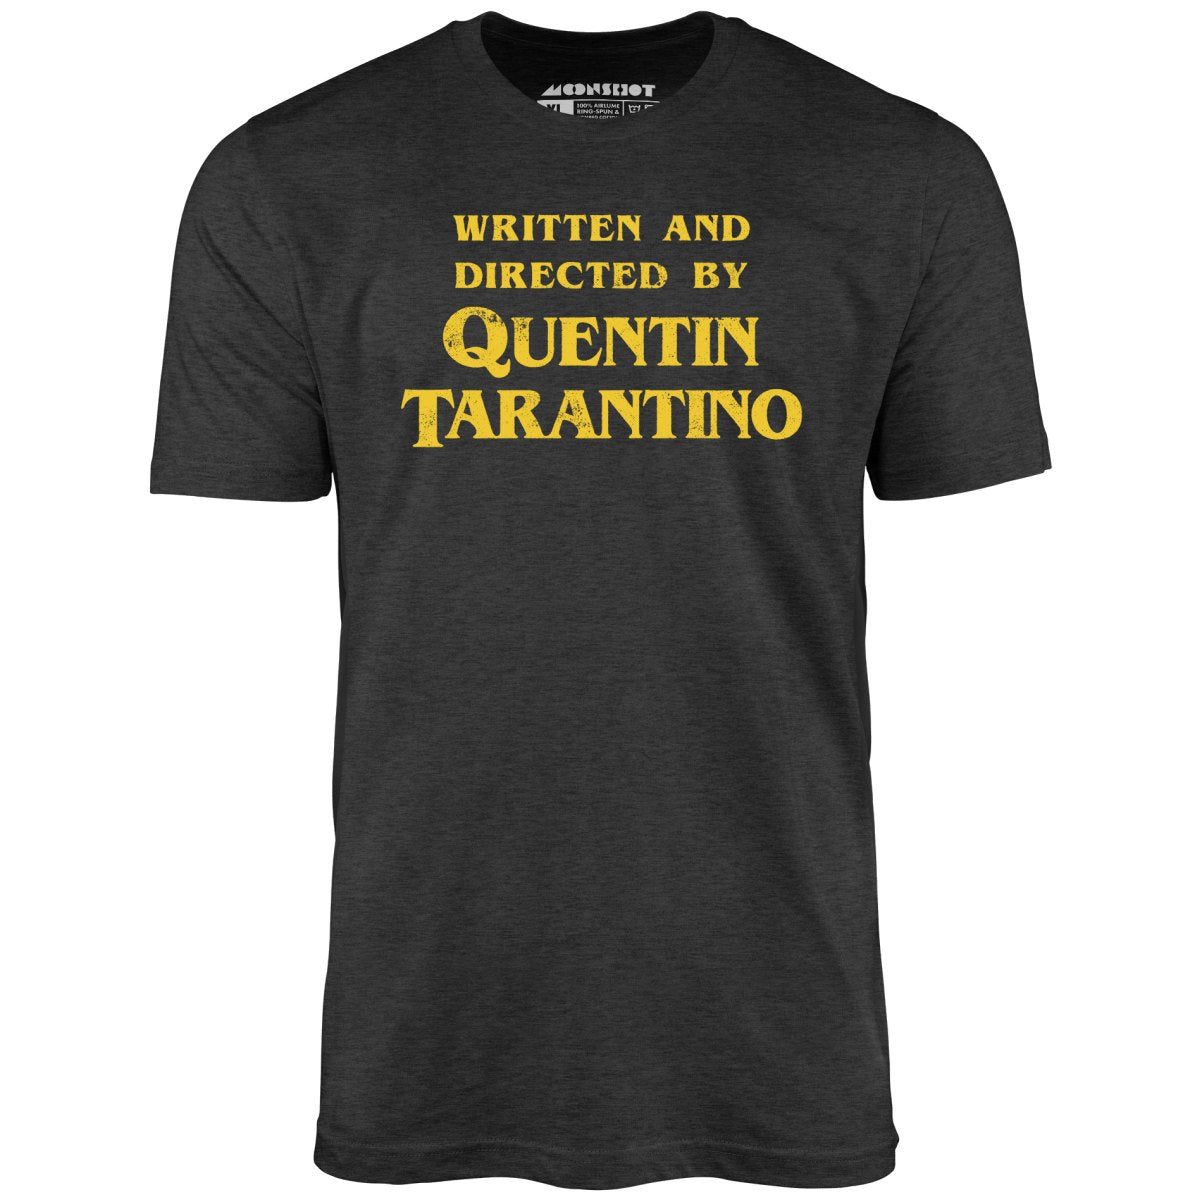 Written and Directed by Quentin Tarantino - Unisex T-Shirt